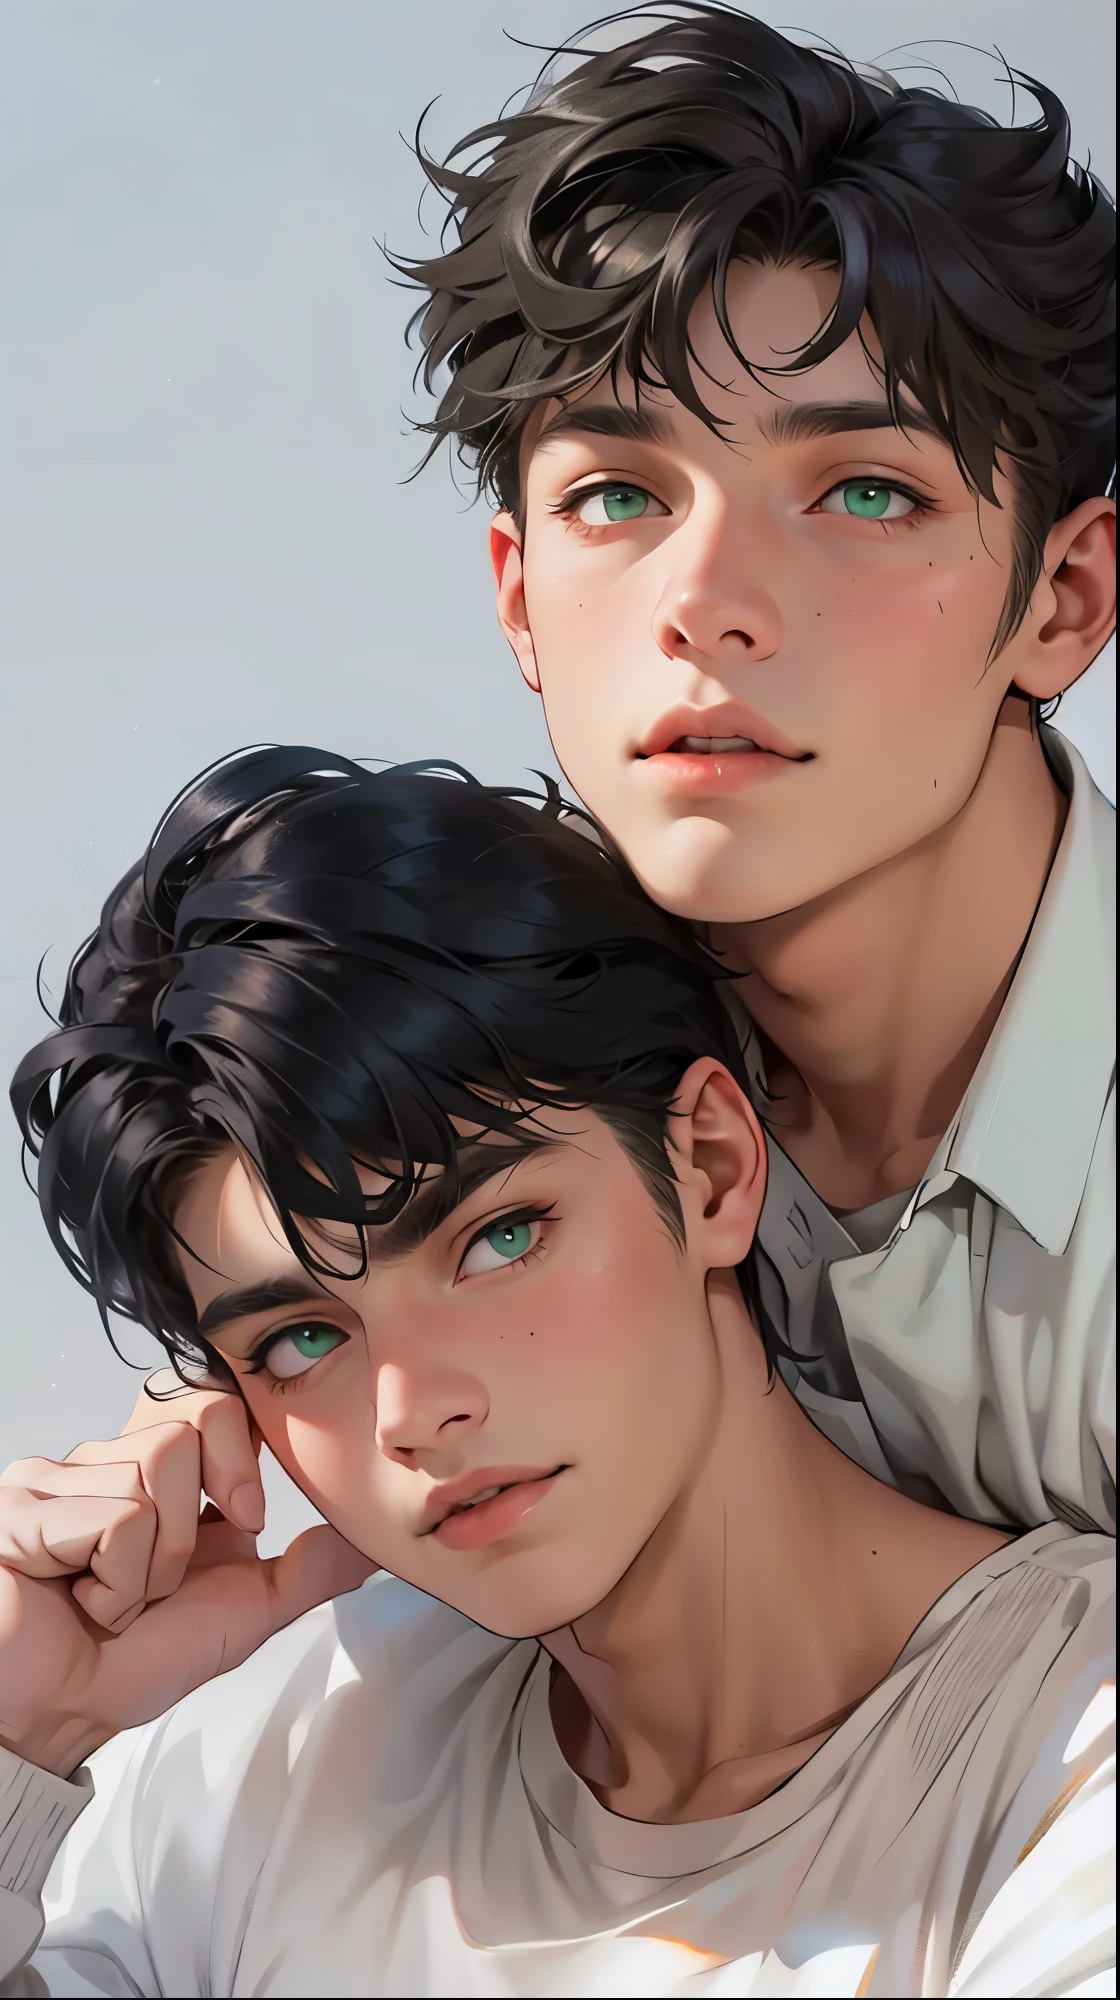 There are two cute 16 year old boys, they are a couple, white hair, green eyes, they are talking lovingly, they open their mouths, one tells a story to the other.